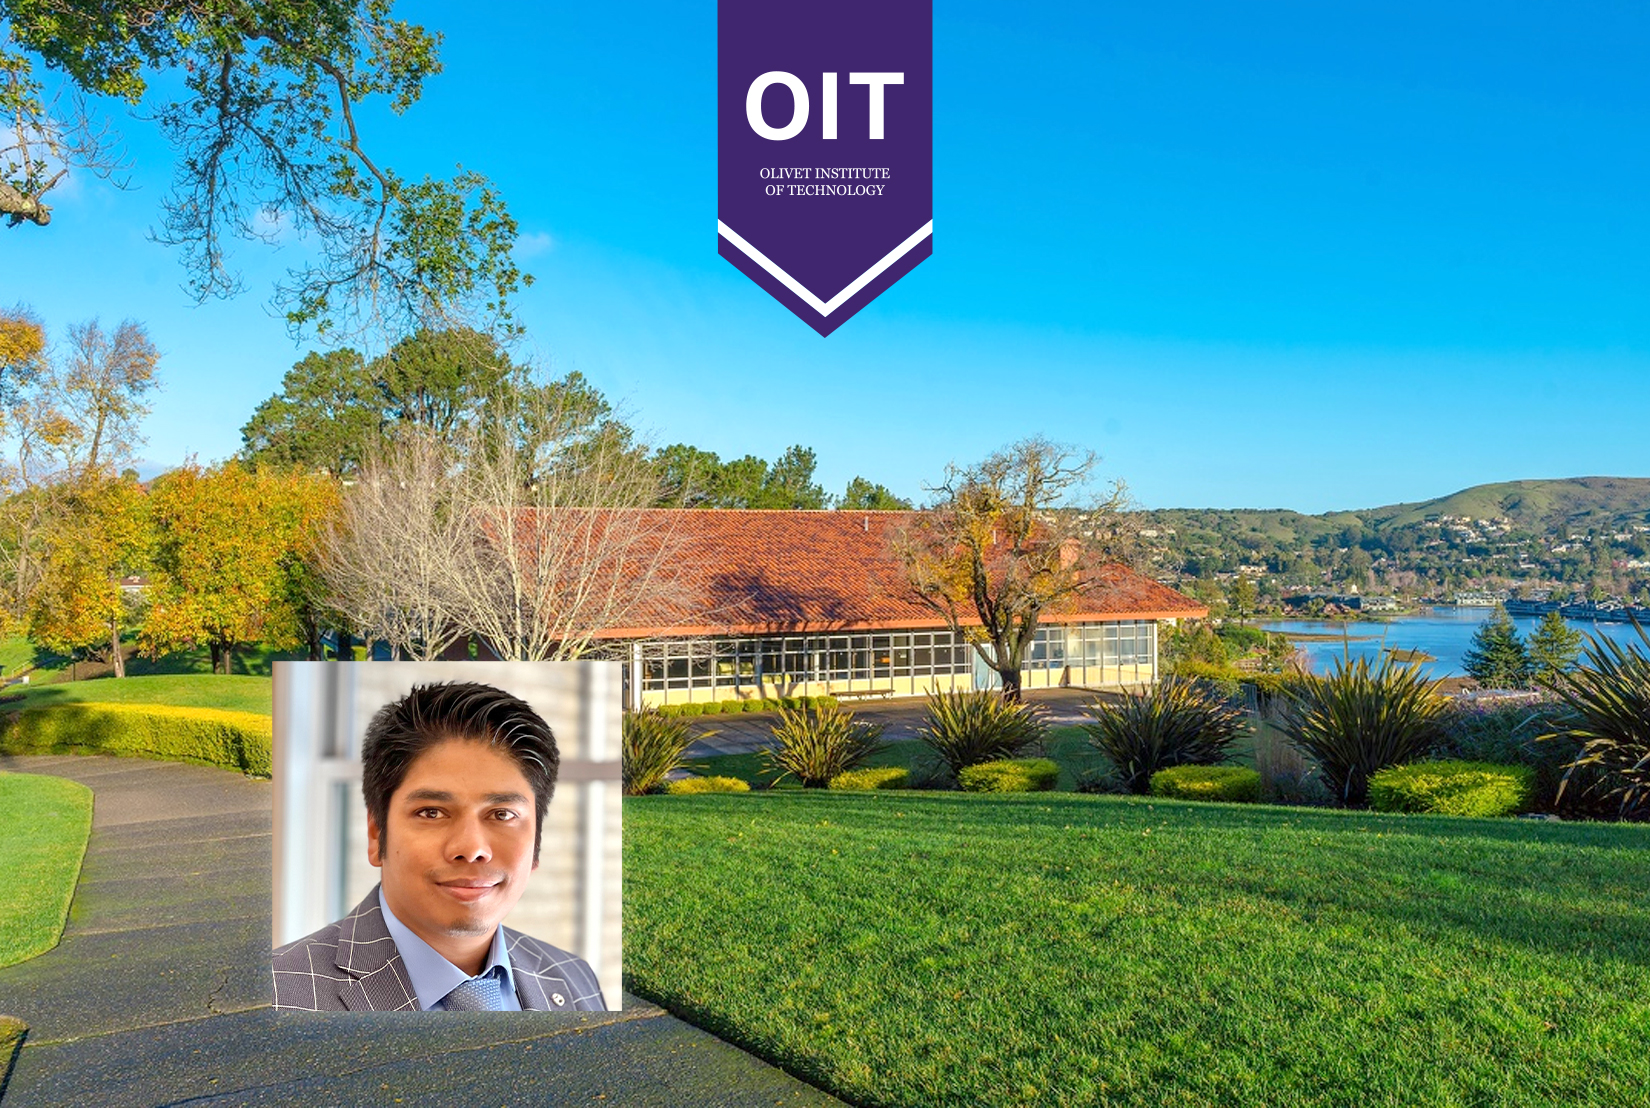 Olivet Institute of Technology Ph.D. Candidates Dive into Advanced Research and Technical Writing in Spring